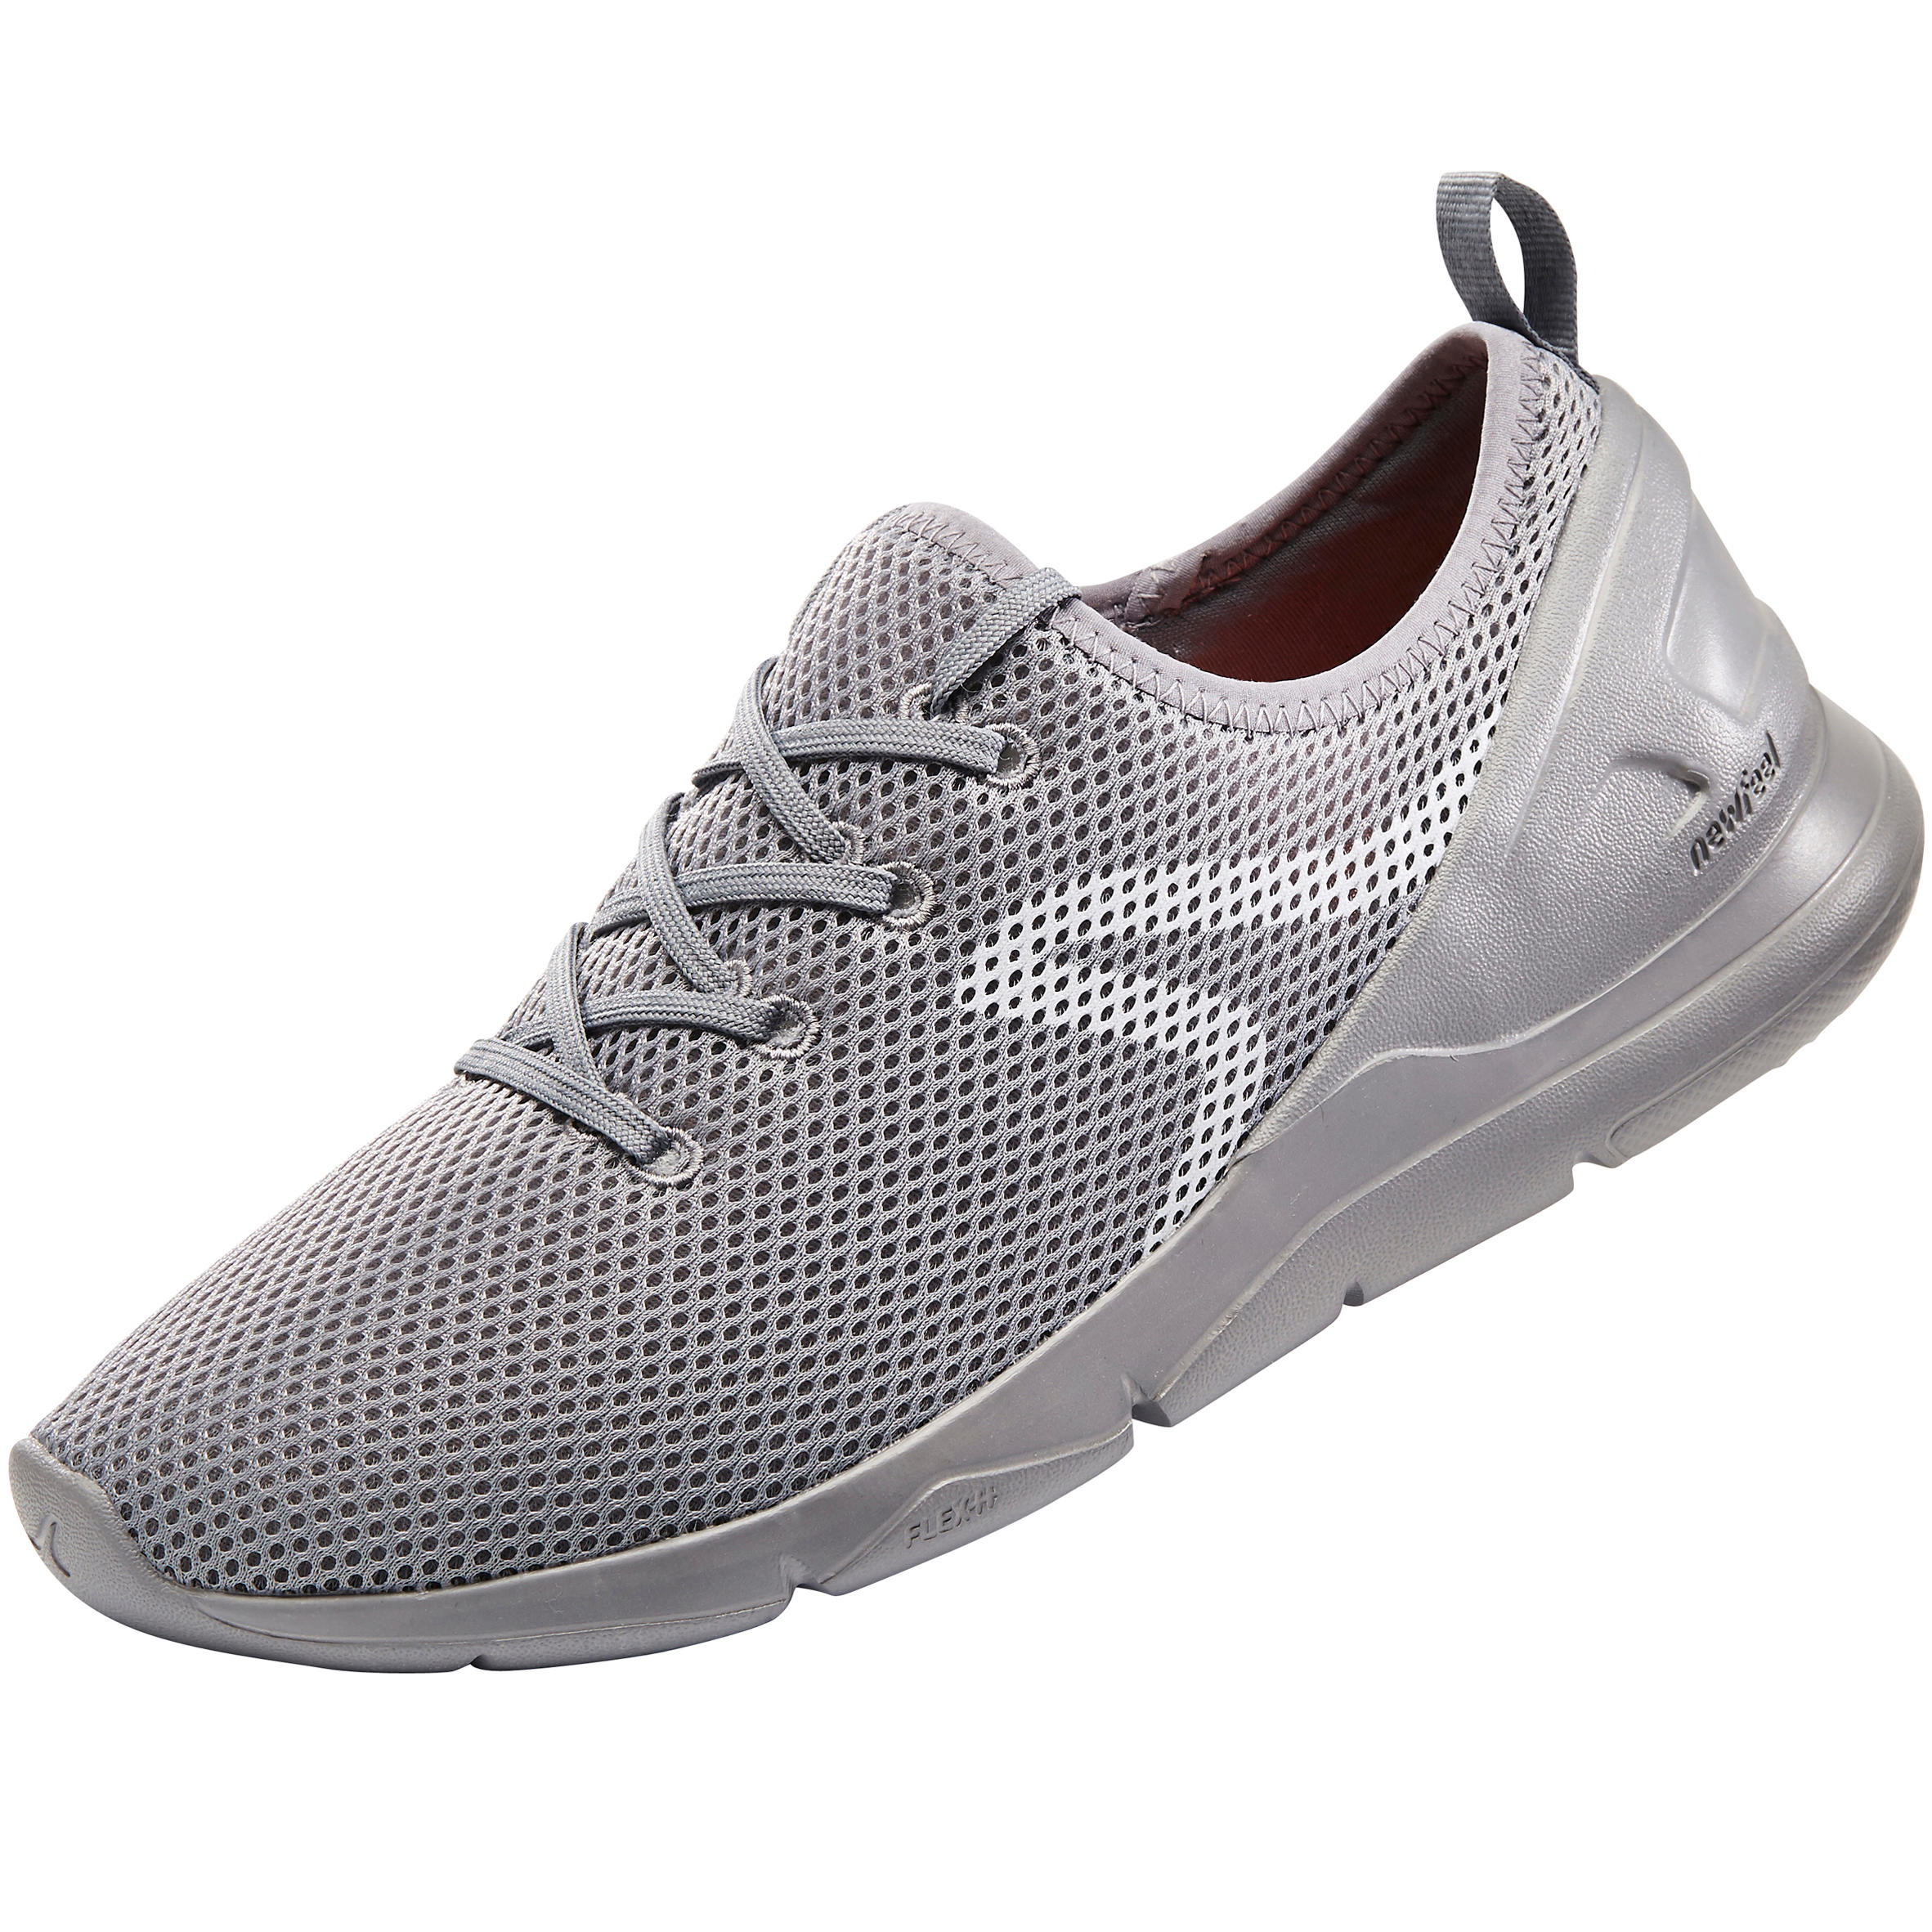 Buy Skechers-UNO 2 - in-KAT-Neato-Women's Casual Shoes-155642-GRY-GRAY UK2  at Amazon.in